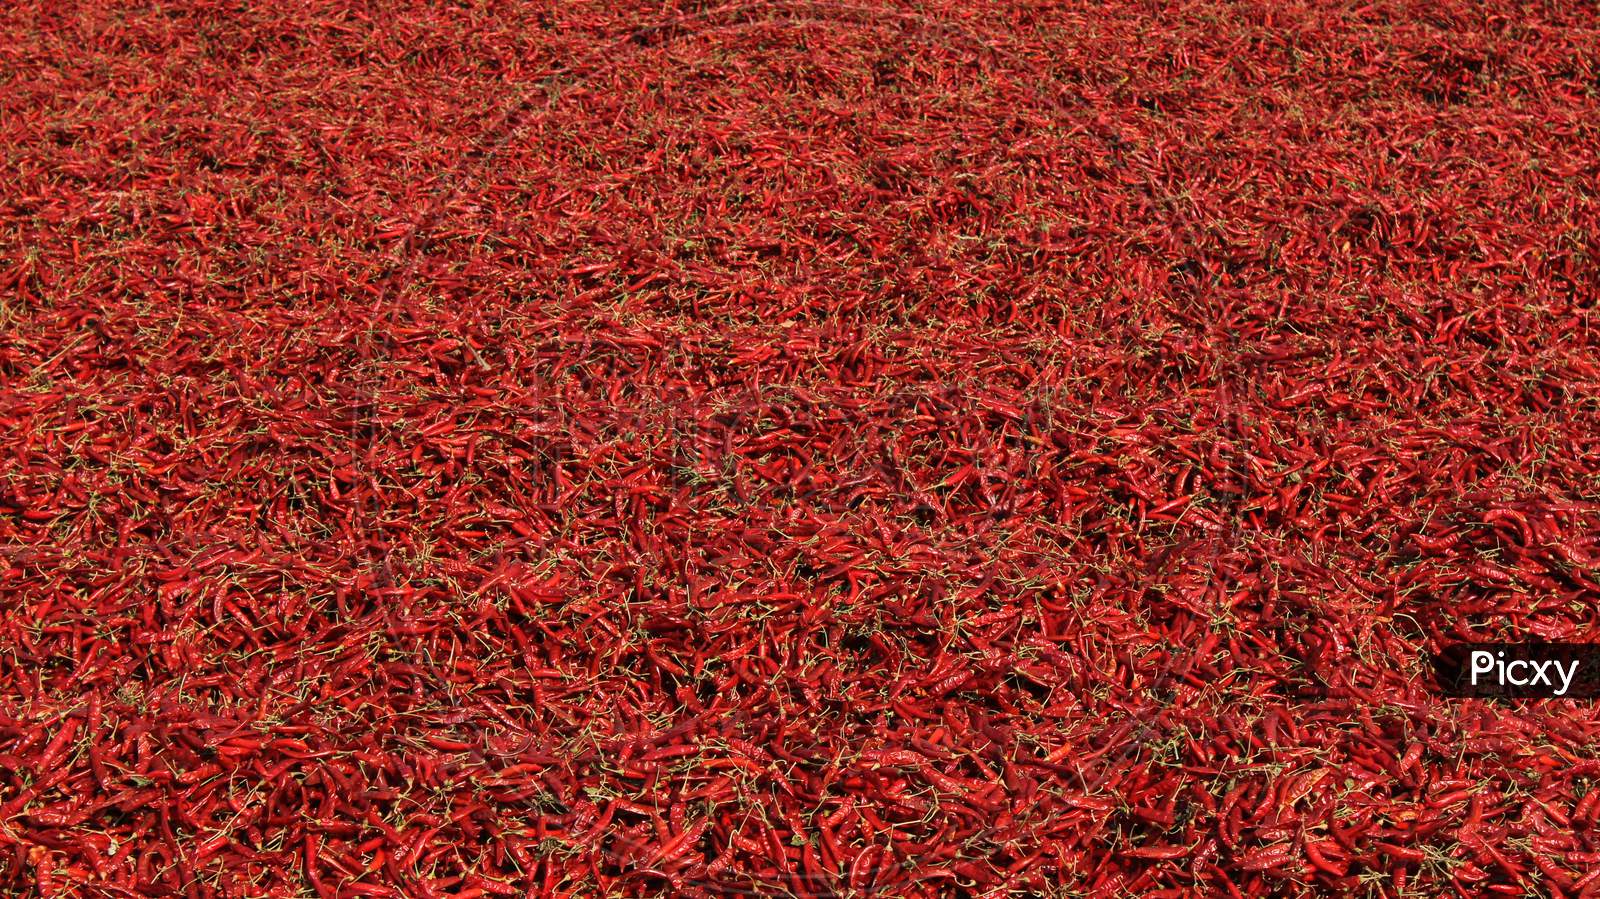 Drying red chilli crop in field